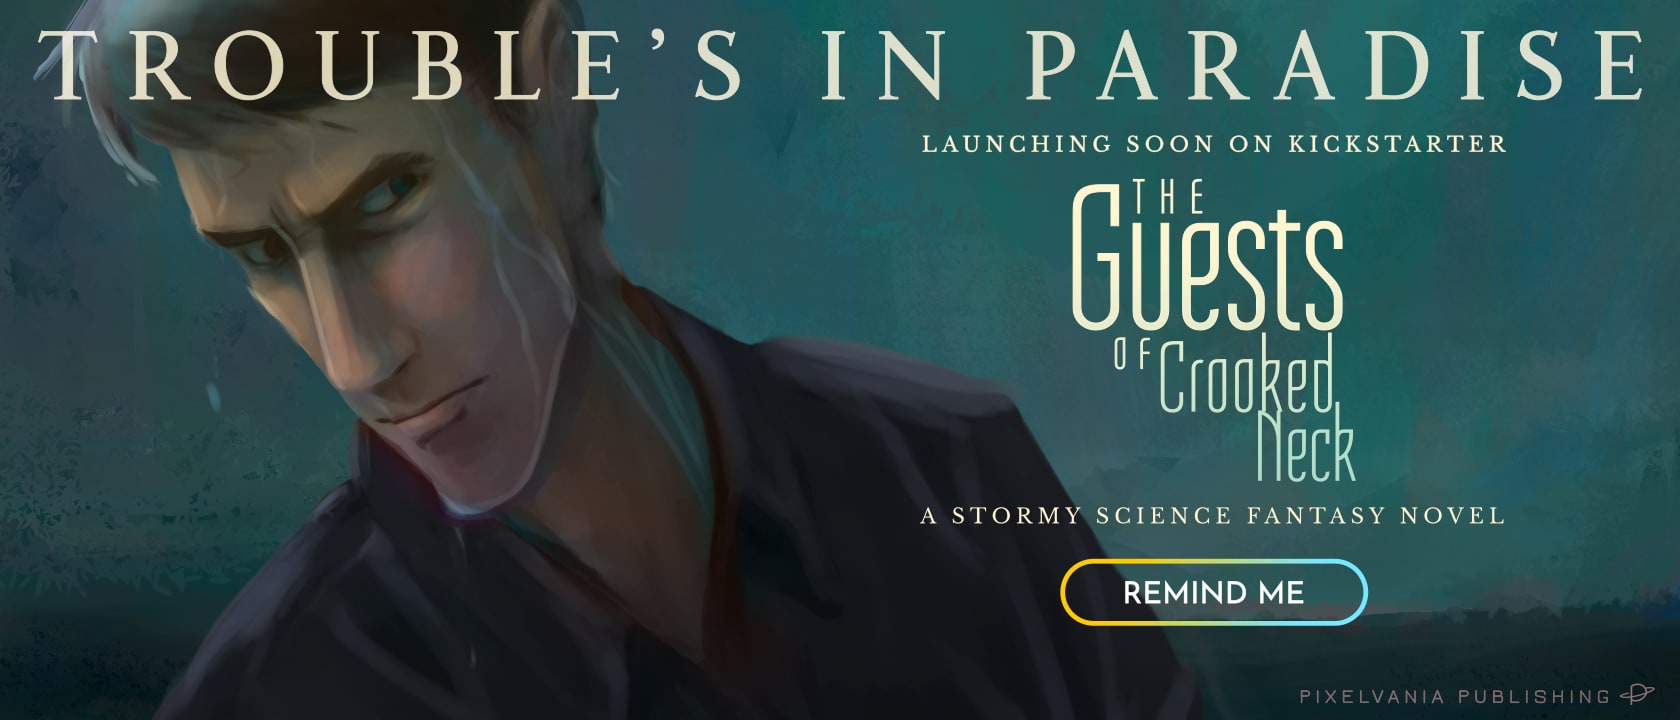 Header image featuring one of the main characters of The Guests of Crooked Neck Text reads: Trouble's in paradise. Launching soon on Kickstarter: The Guests of Crooked Neck. A stormy science fantasy novel. Click here to be reminded when it launches.